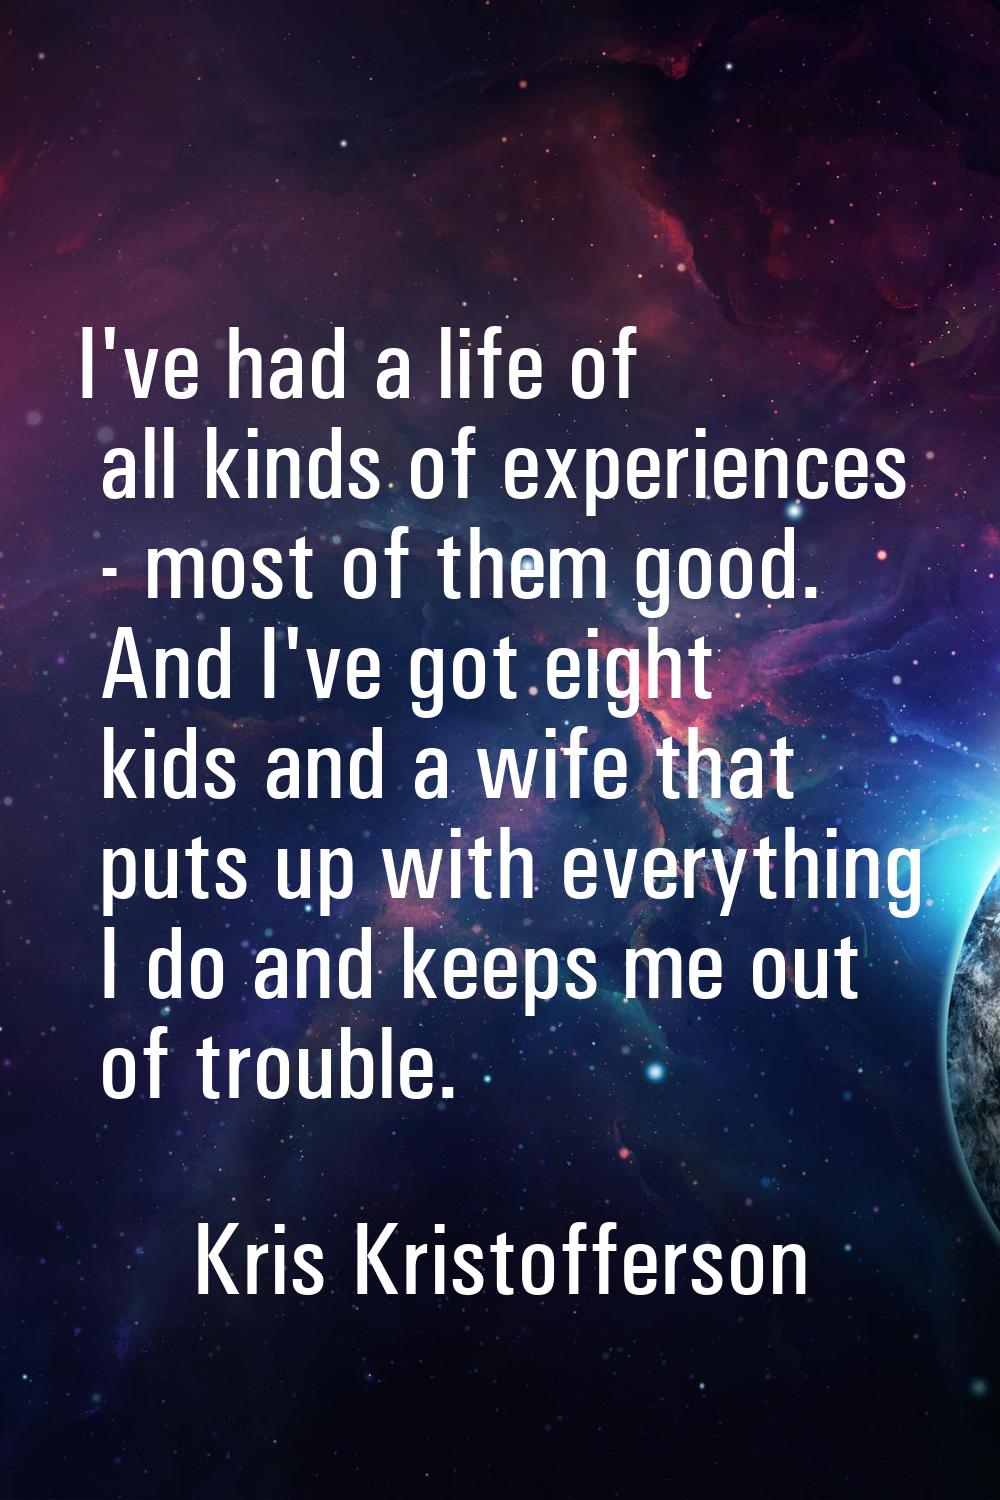 I've had a life of all kinds of experiences - most of them good. And I've got eight kids and a wife